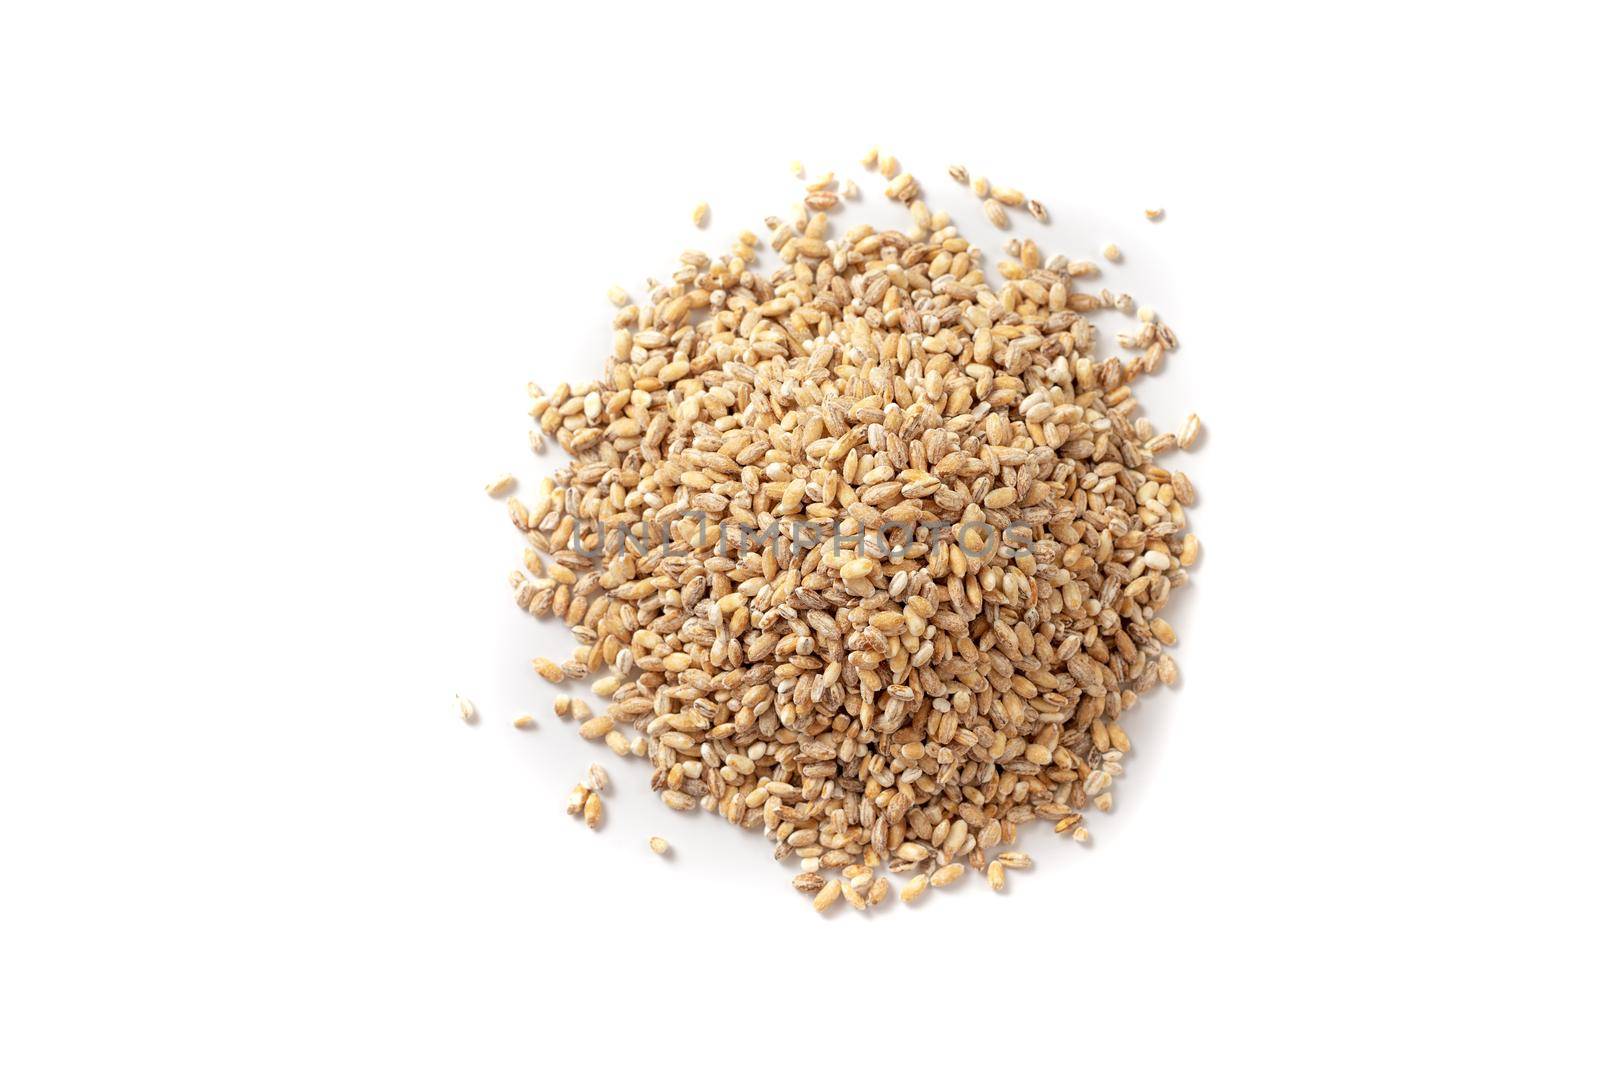 A bunch of barley on a white background isolate. Healthy Ancient grain food by gulyaevstudio